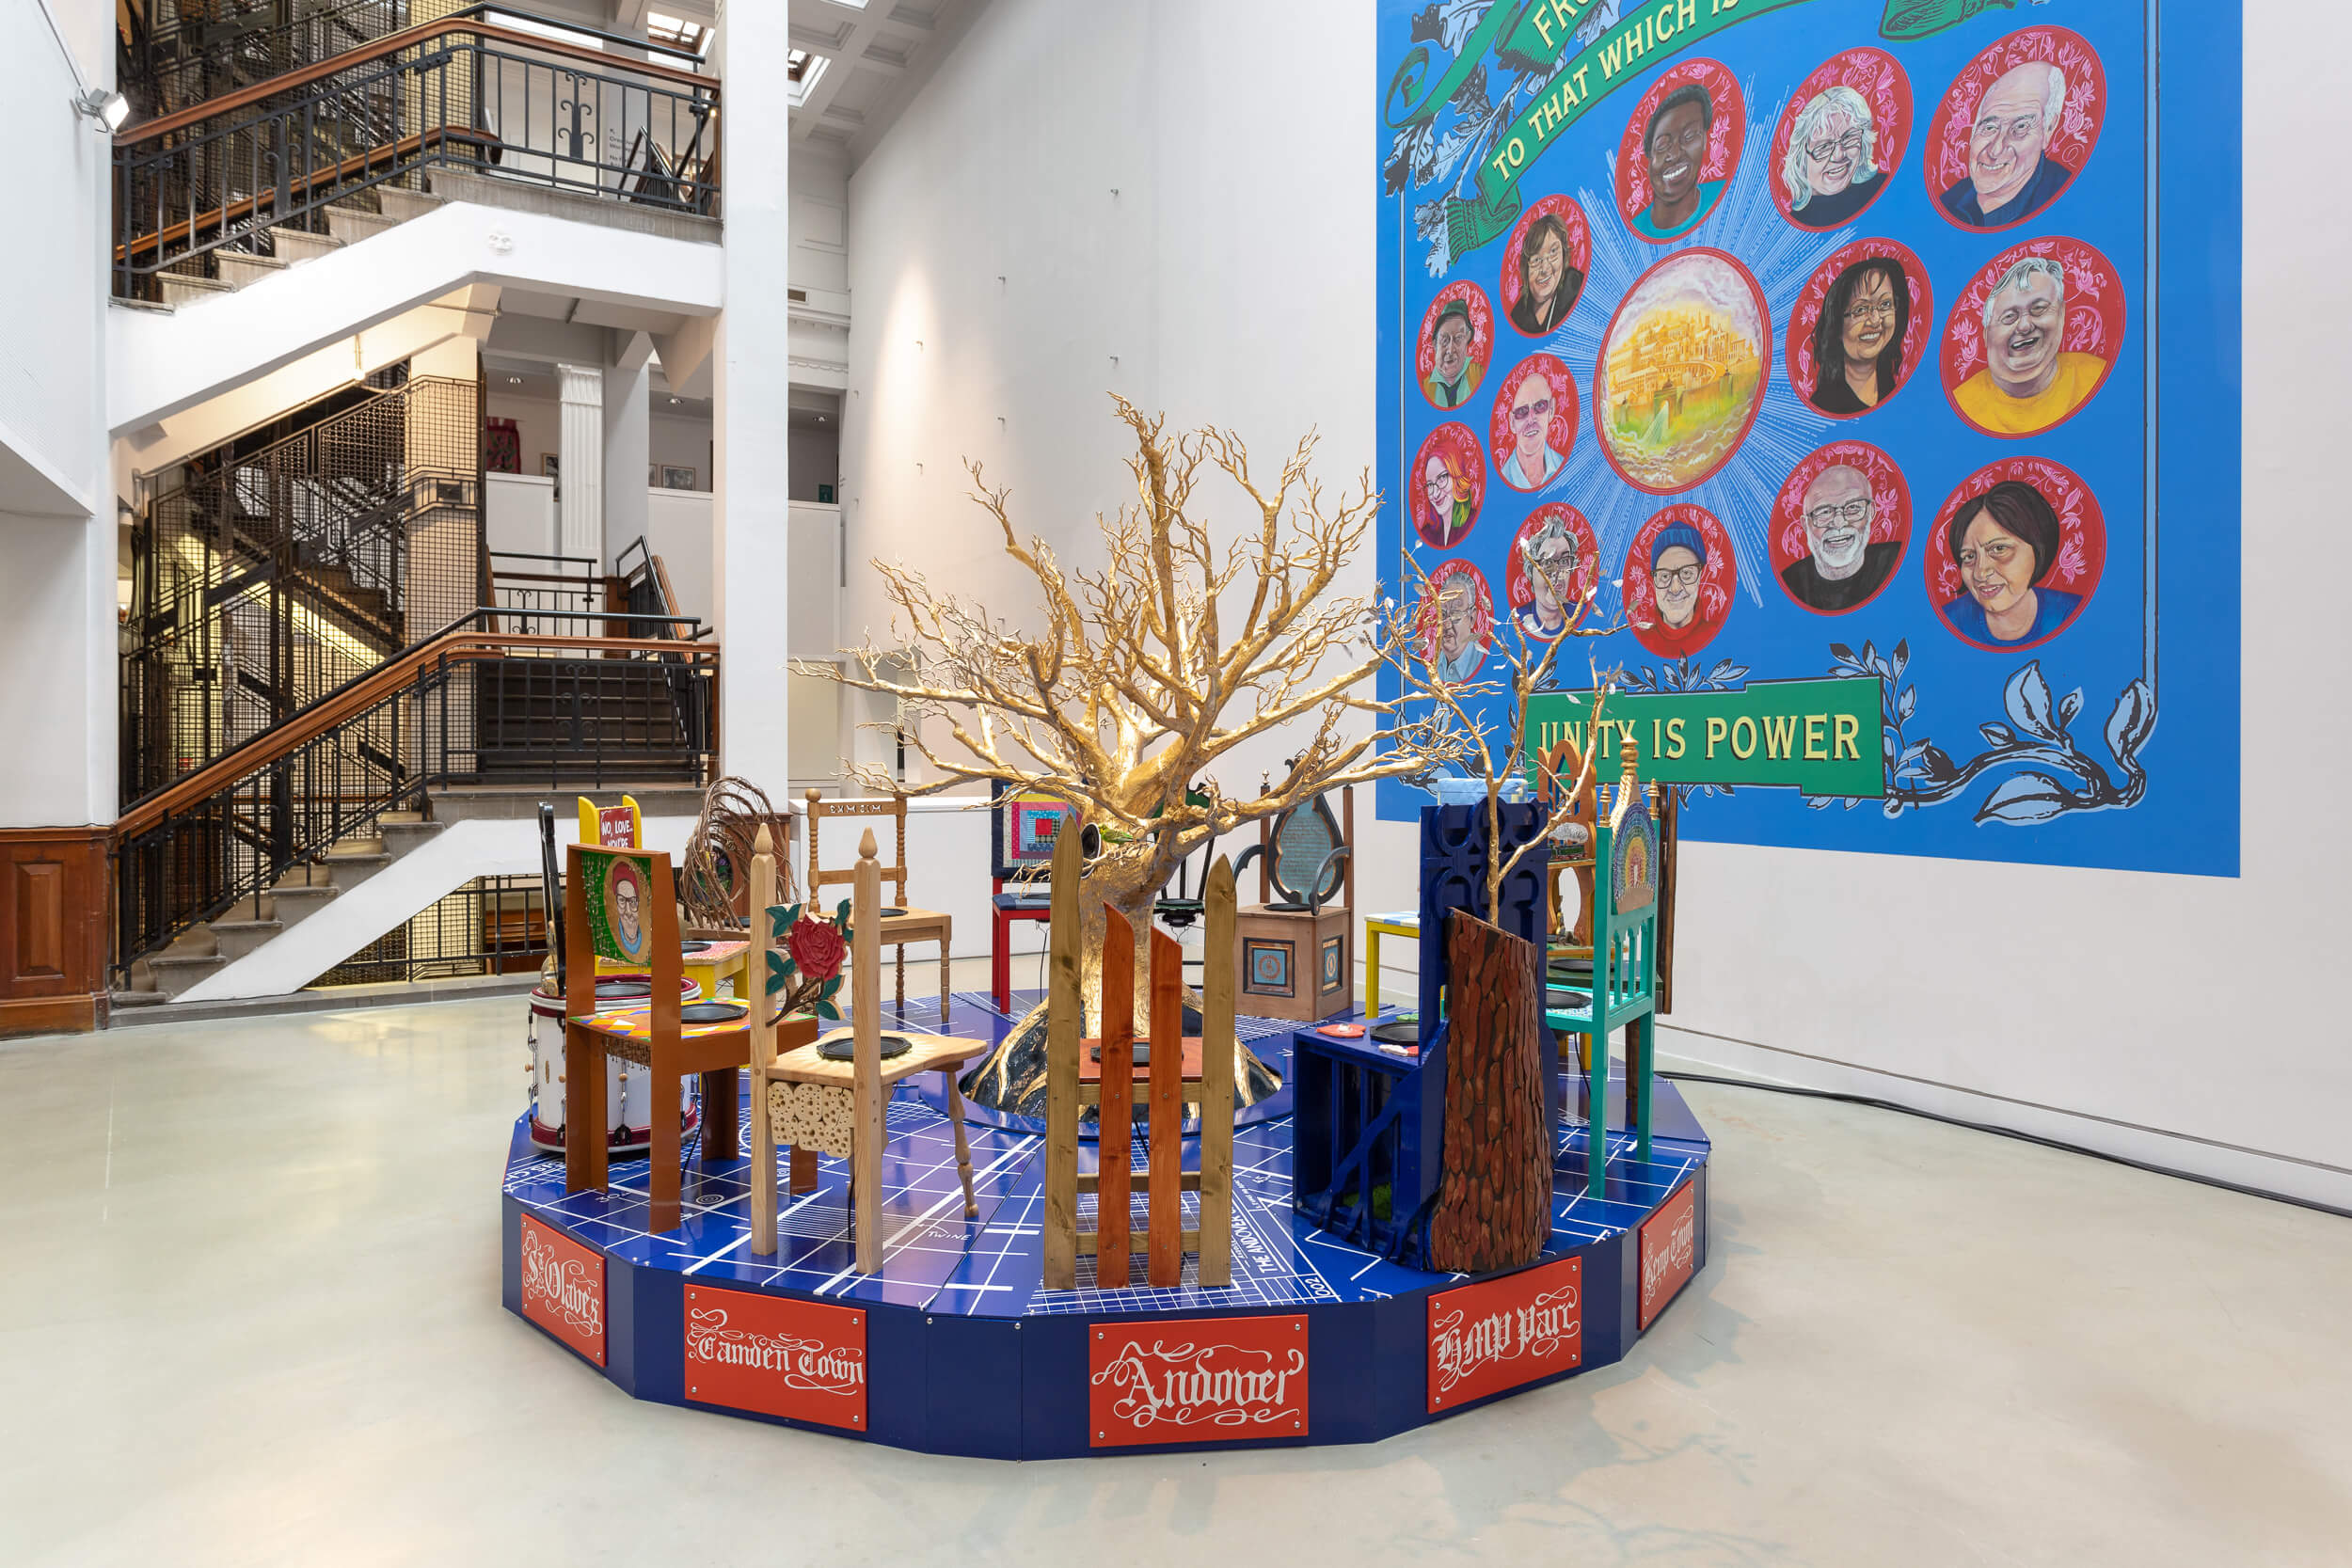 The Tetley launches new exhibition by Mel Brimfield